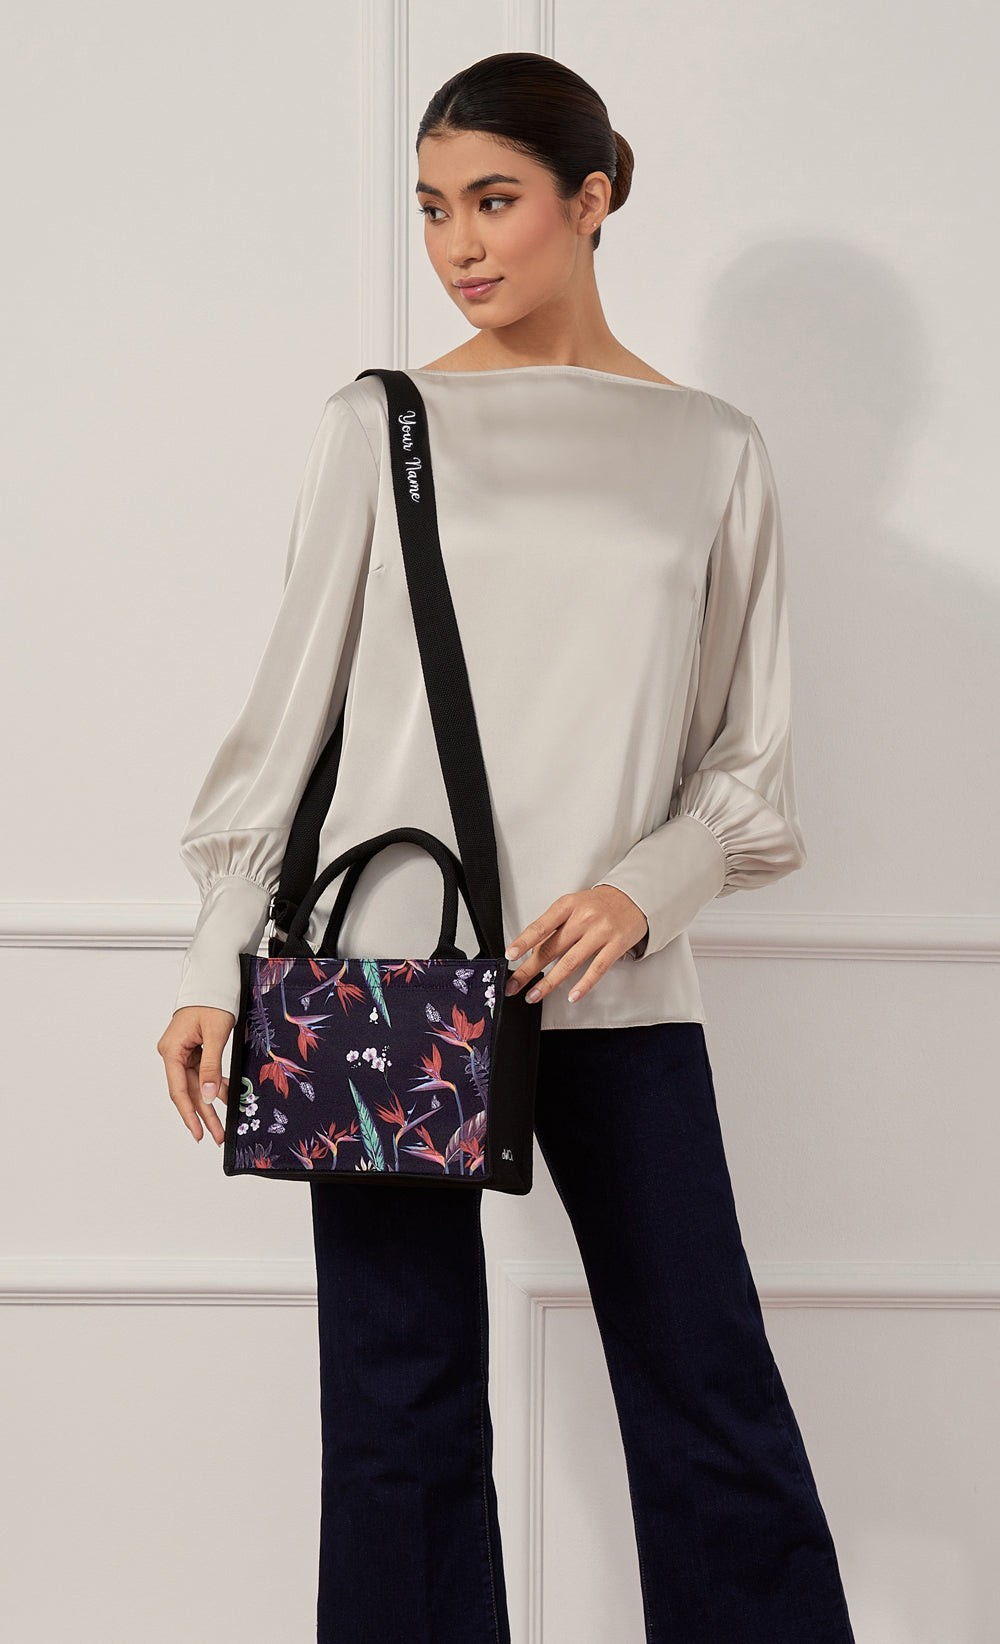 The Blooming dUCk - Paradise Micro Shopping Bag in Black